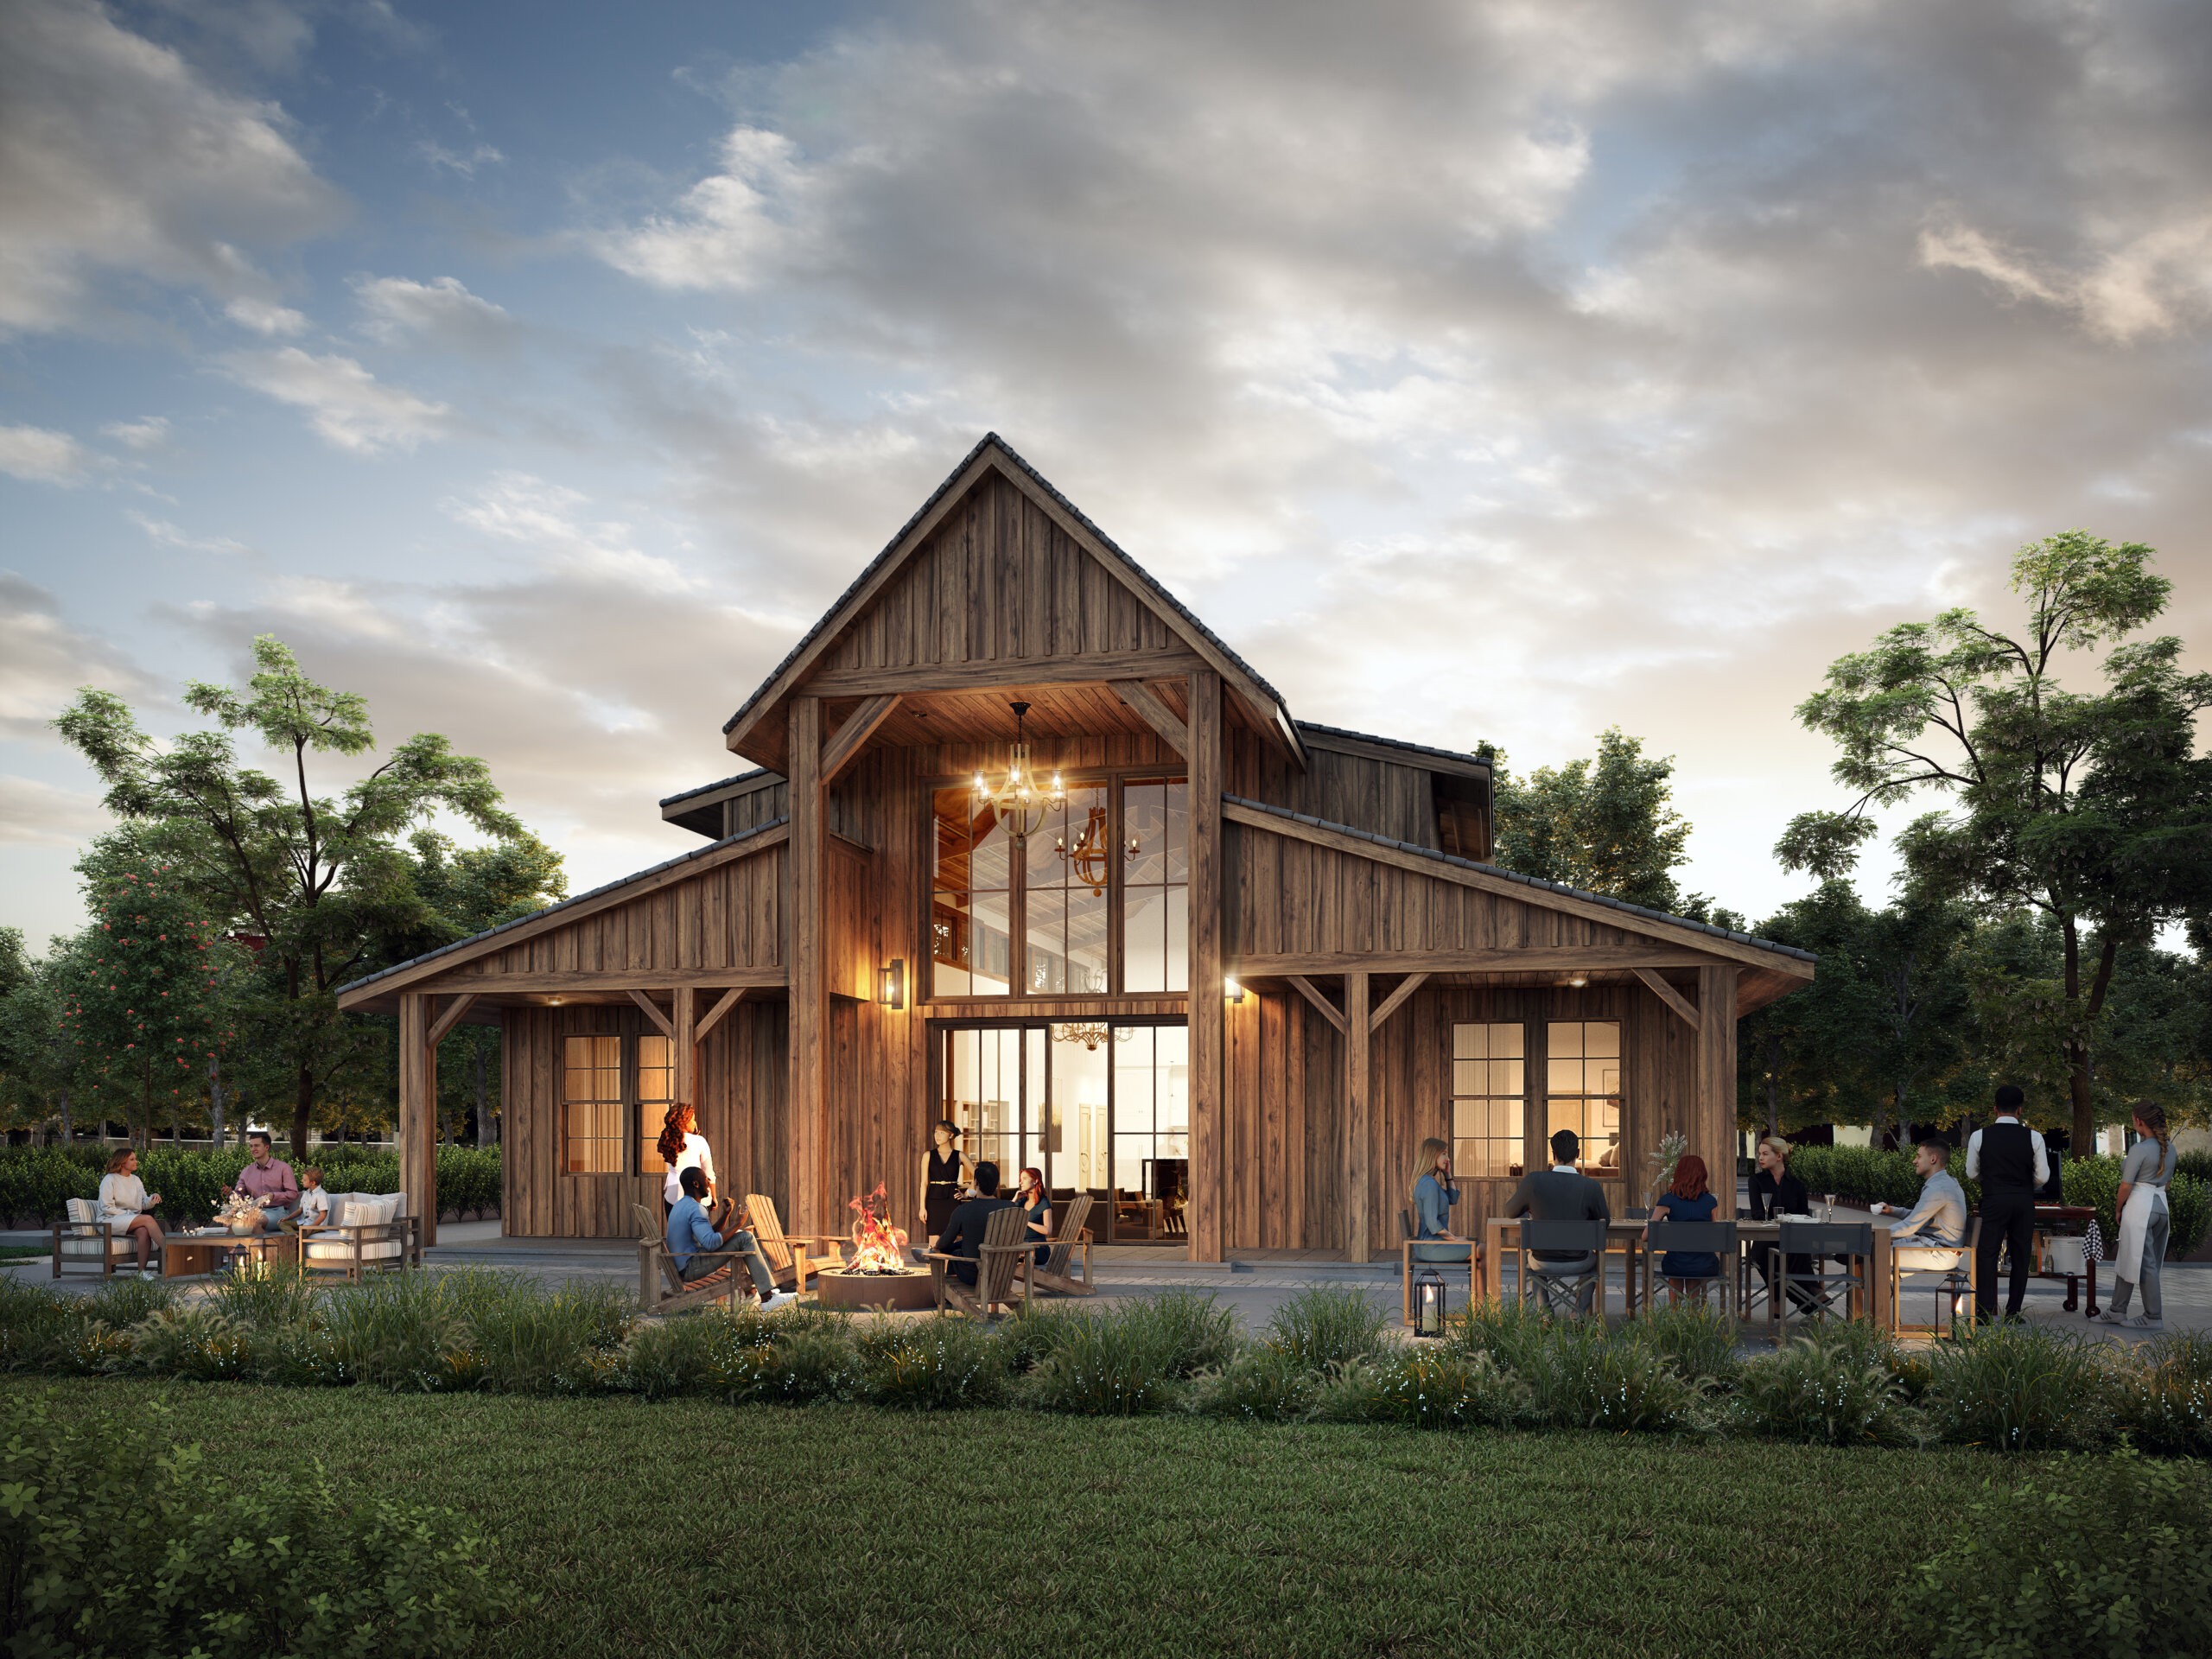 Tiny home development in Texas sparks criticism online